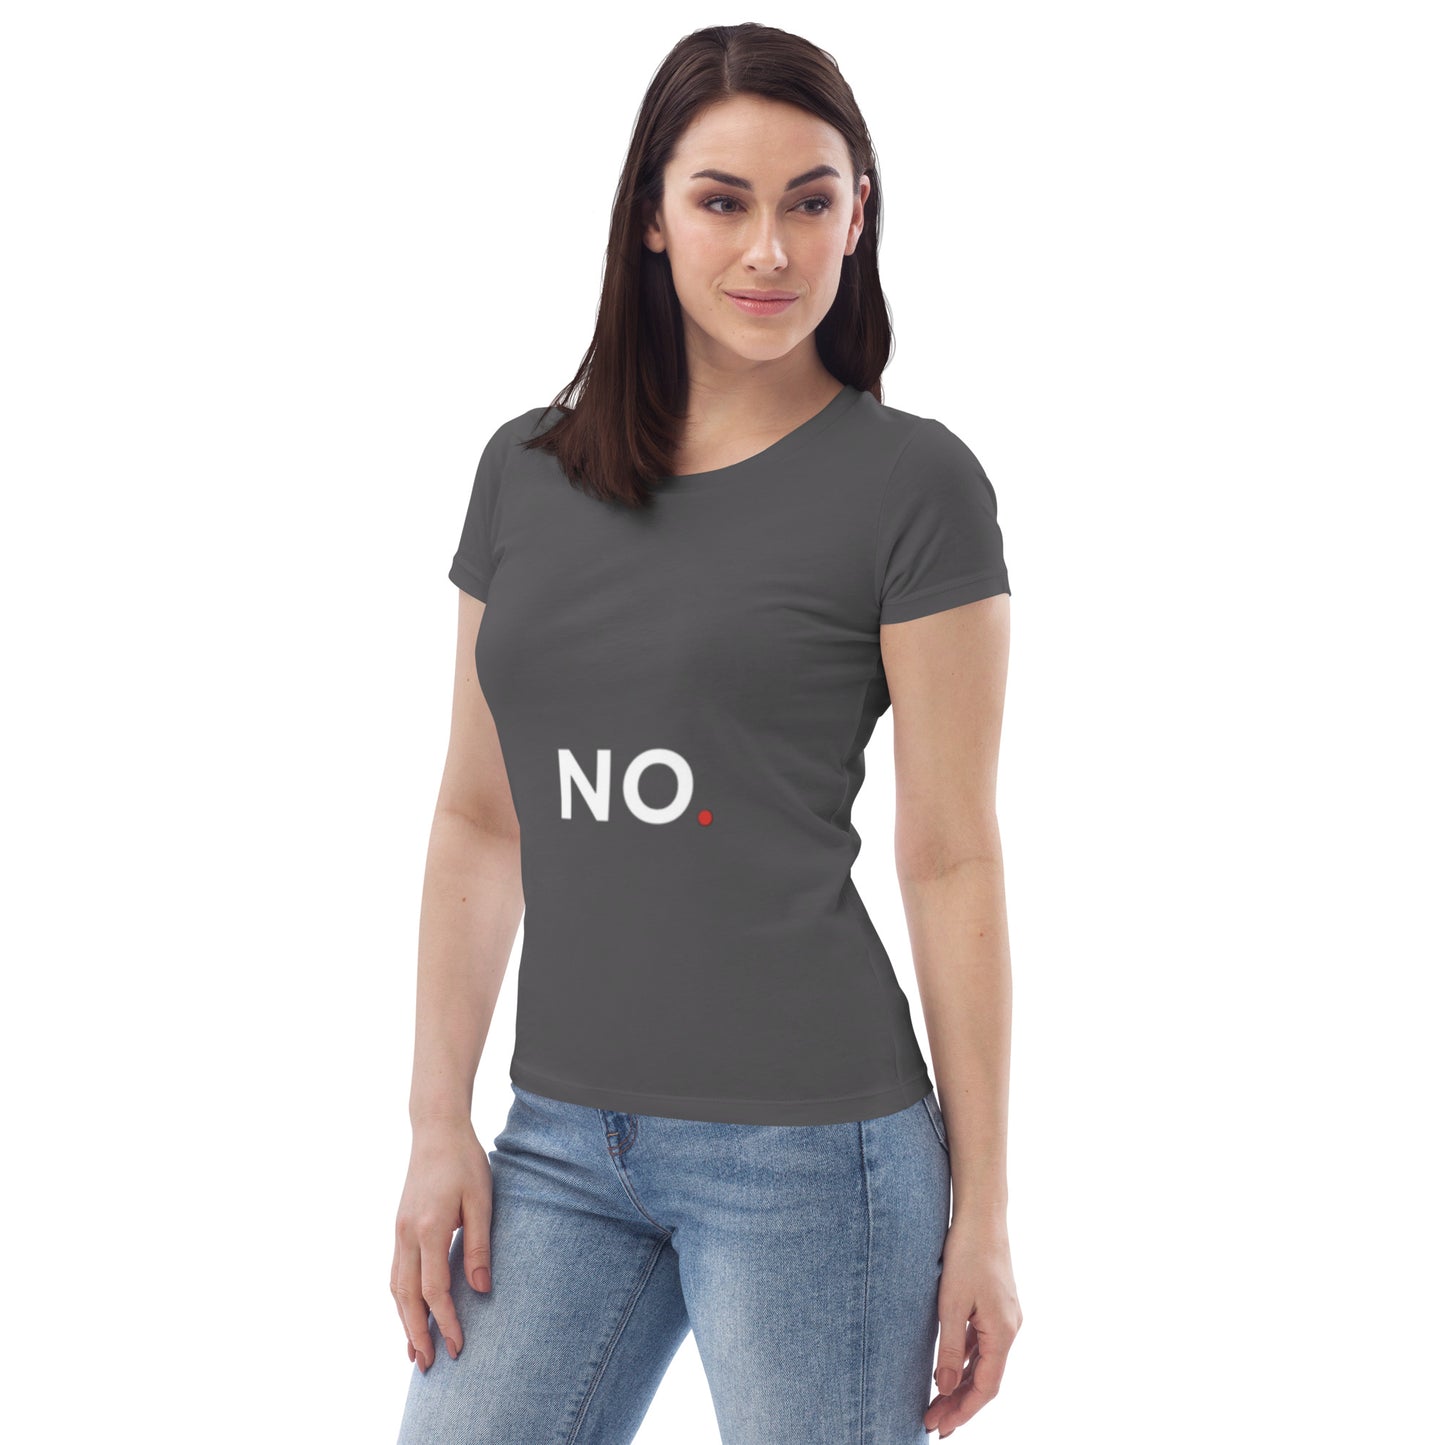 "No" Women's fitted eco tee